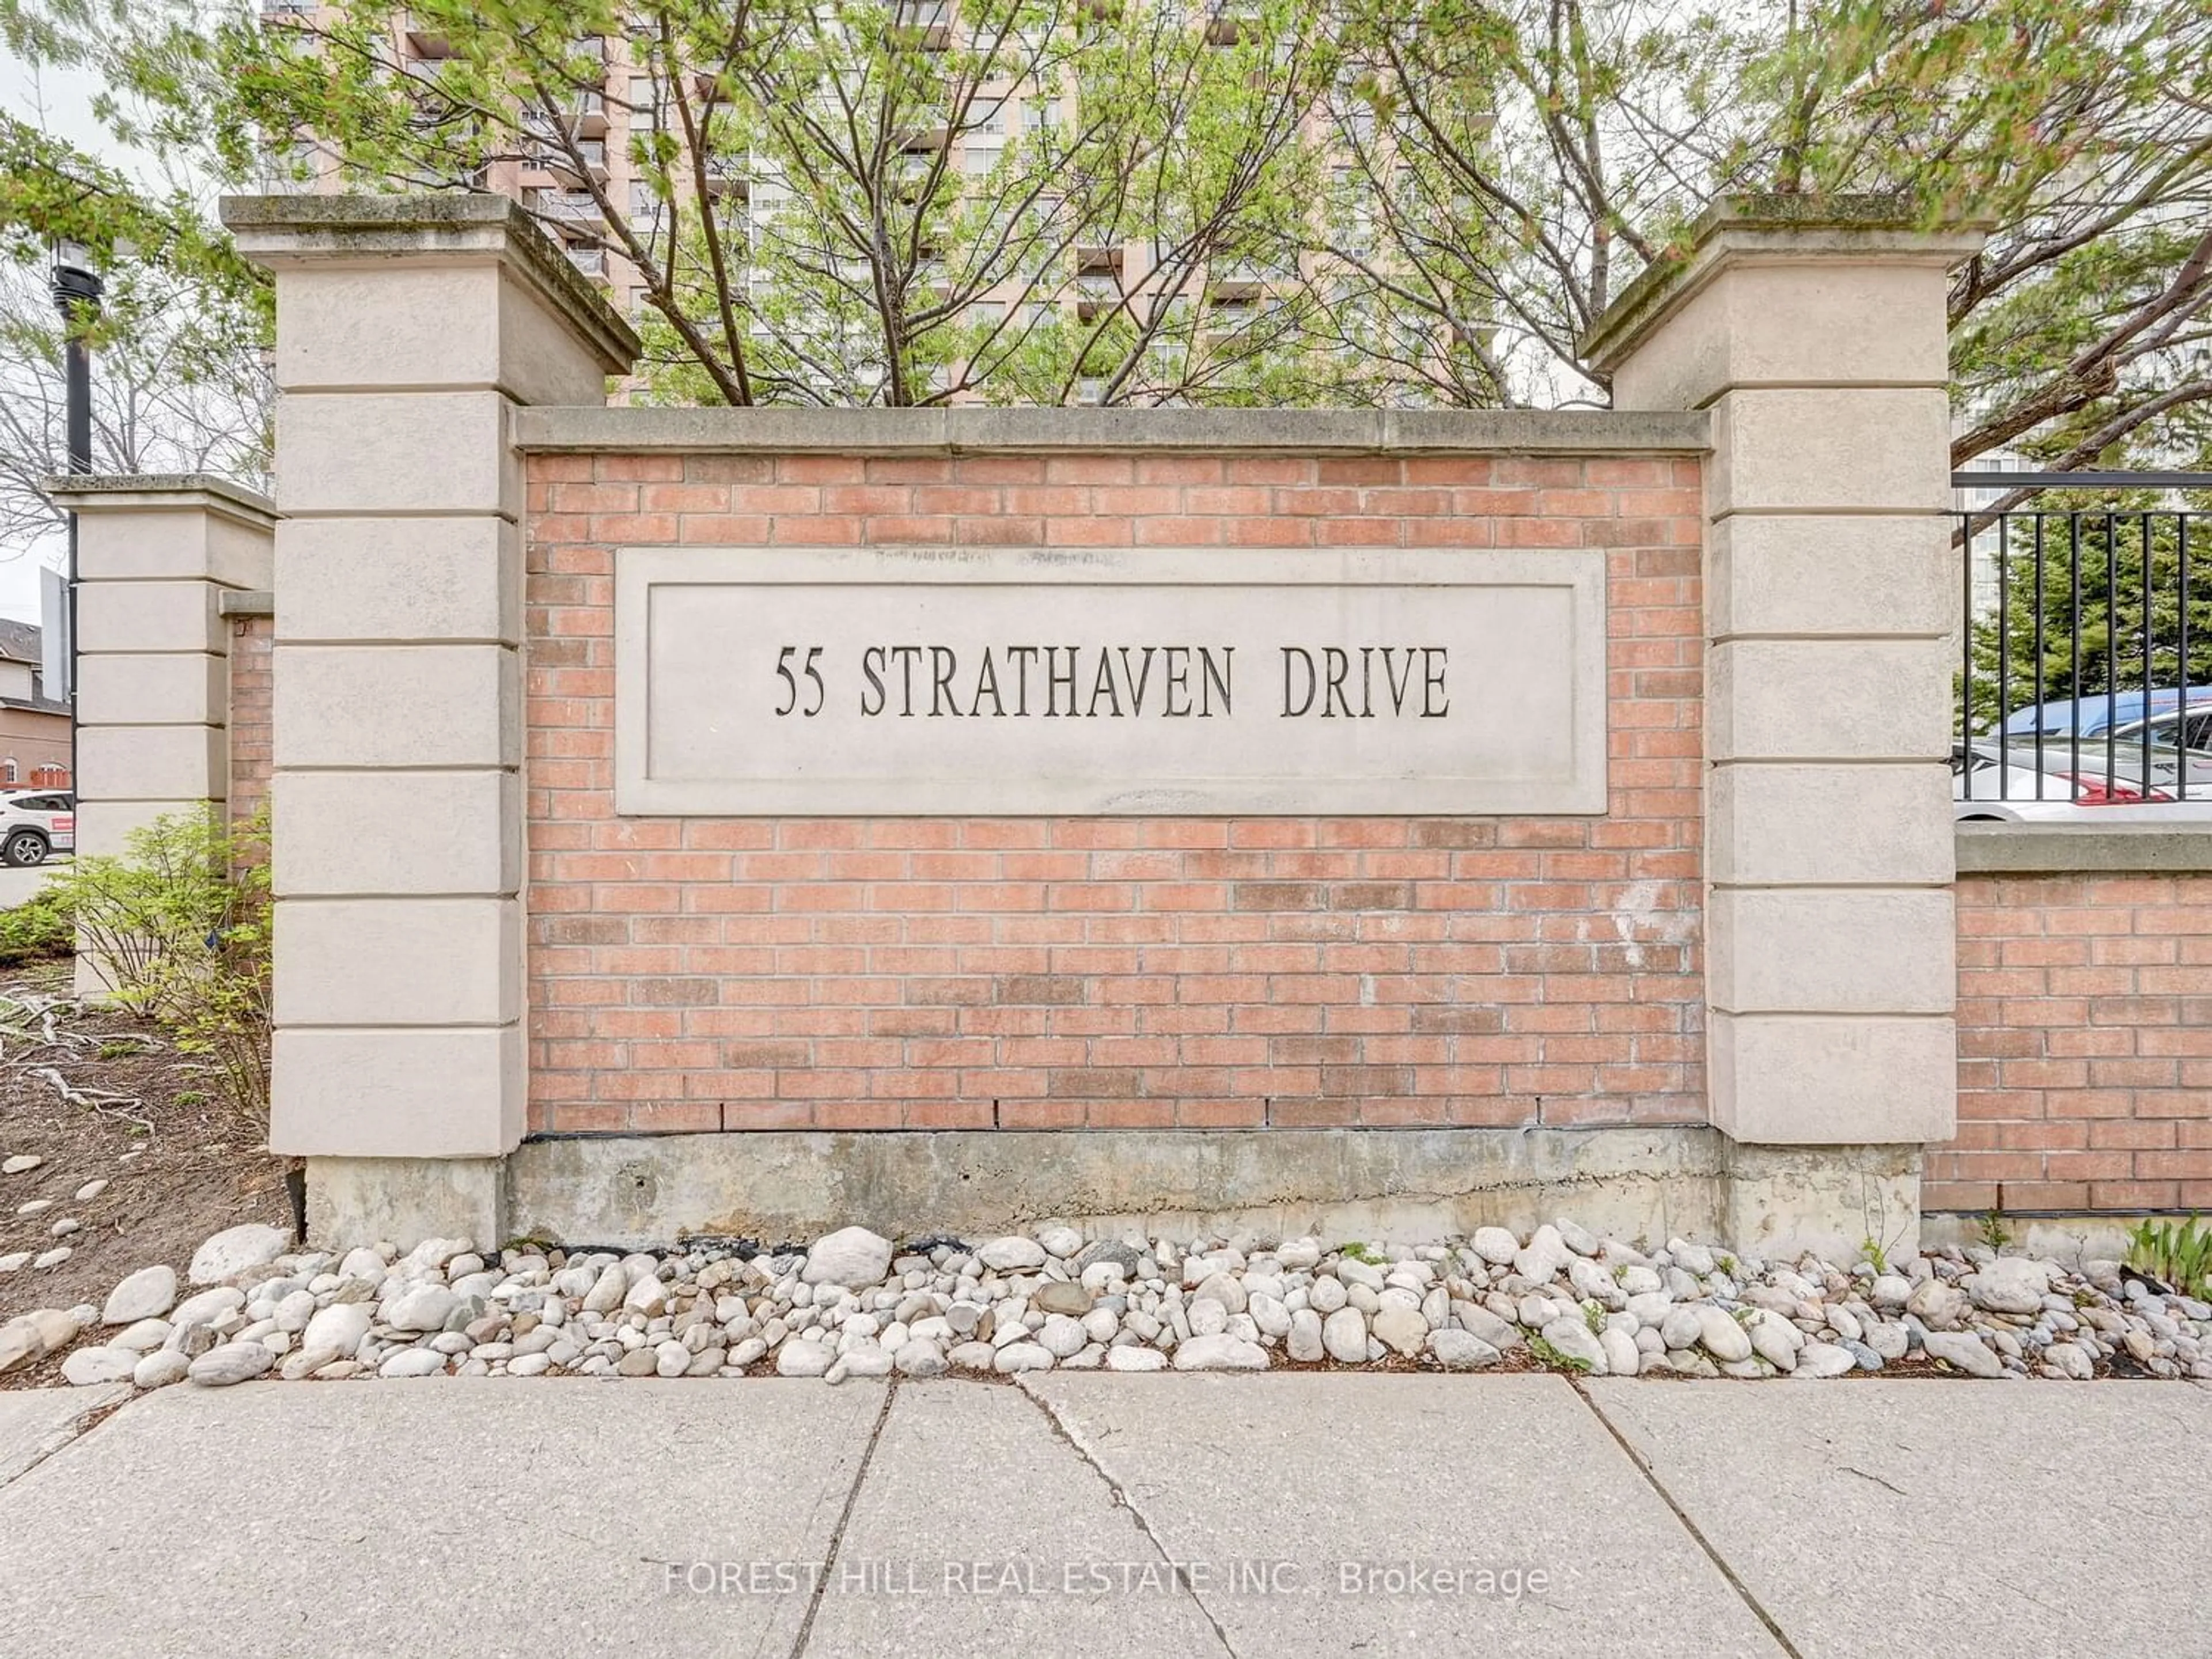 Street view for 55 Strathaven Dr #308, Mississauga Ontario L5R 4G9